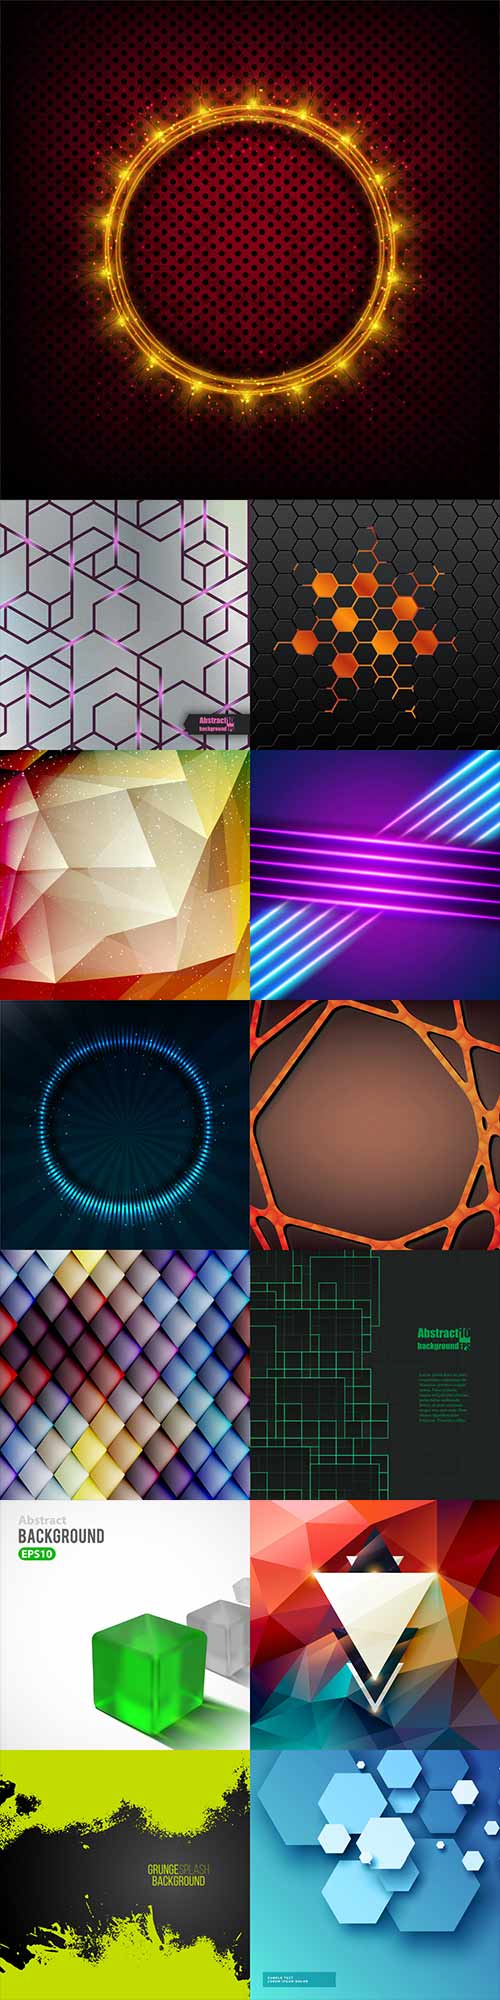 Bright colorful abstract backgrounds vector - 79